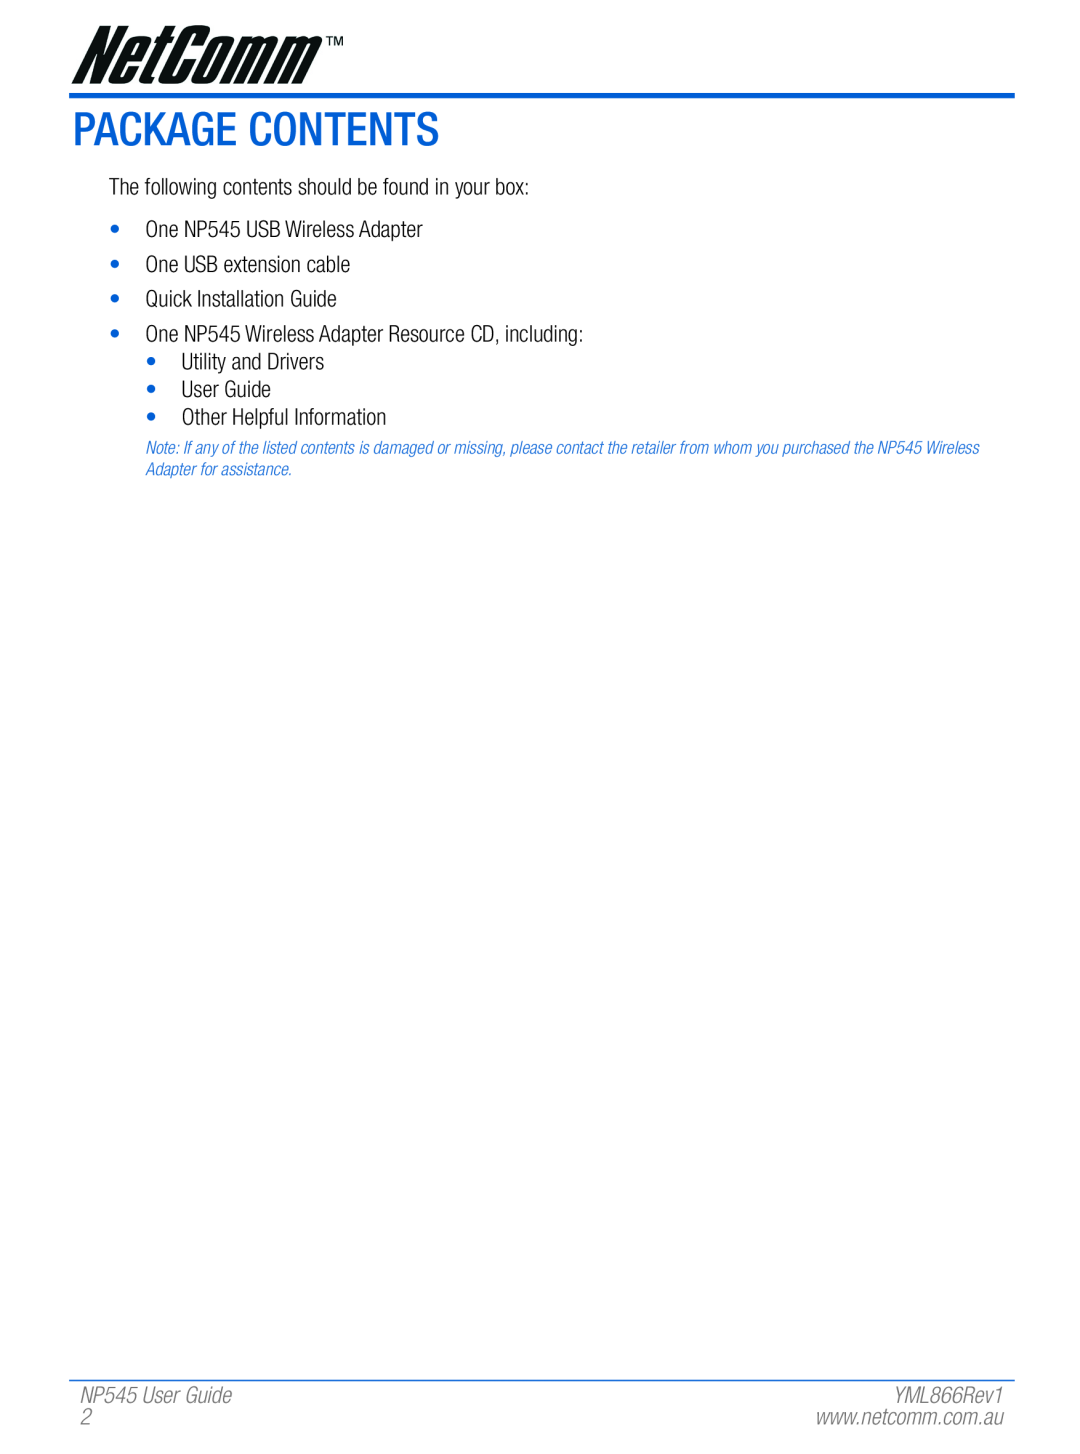 NetComm manual Package Contents, NP545 User Guide 